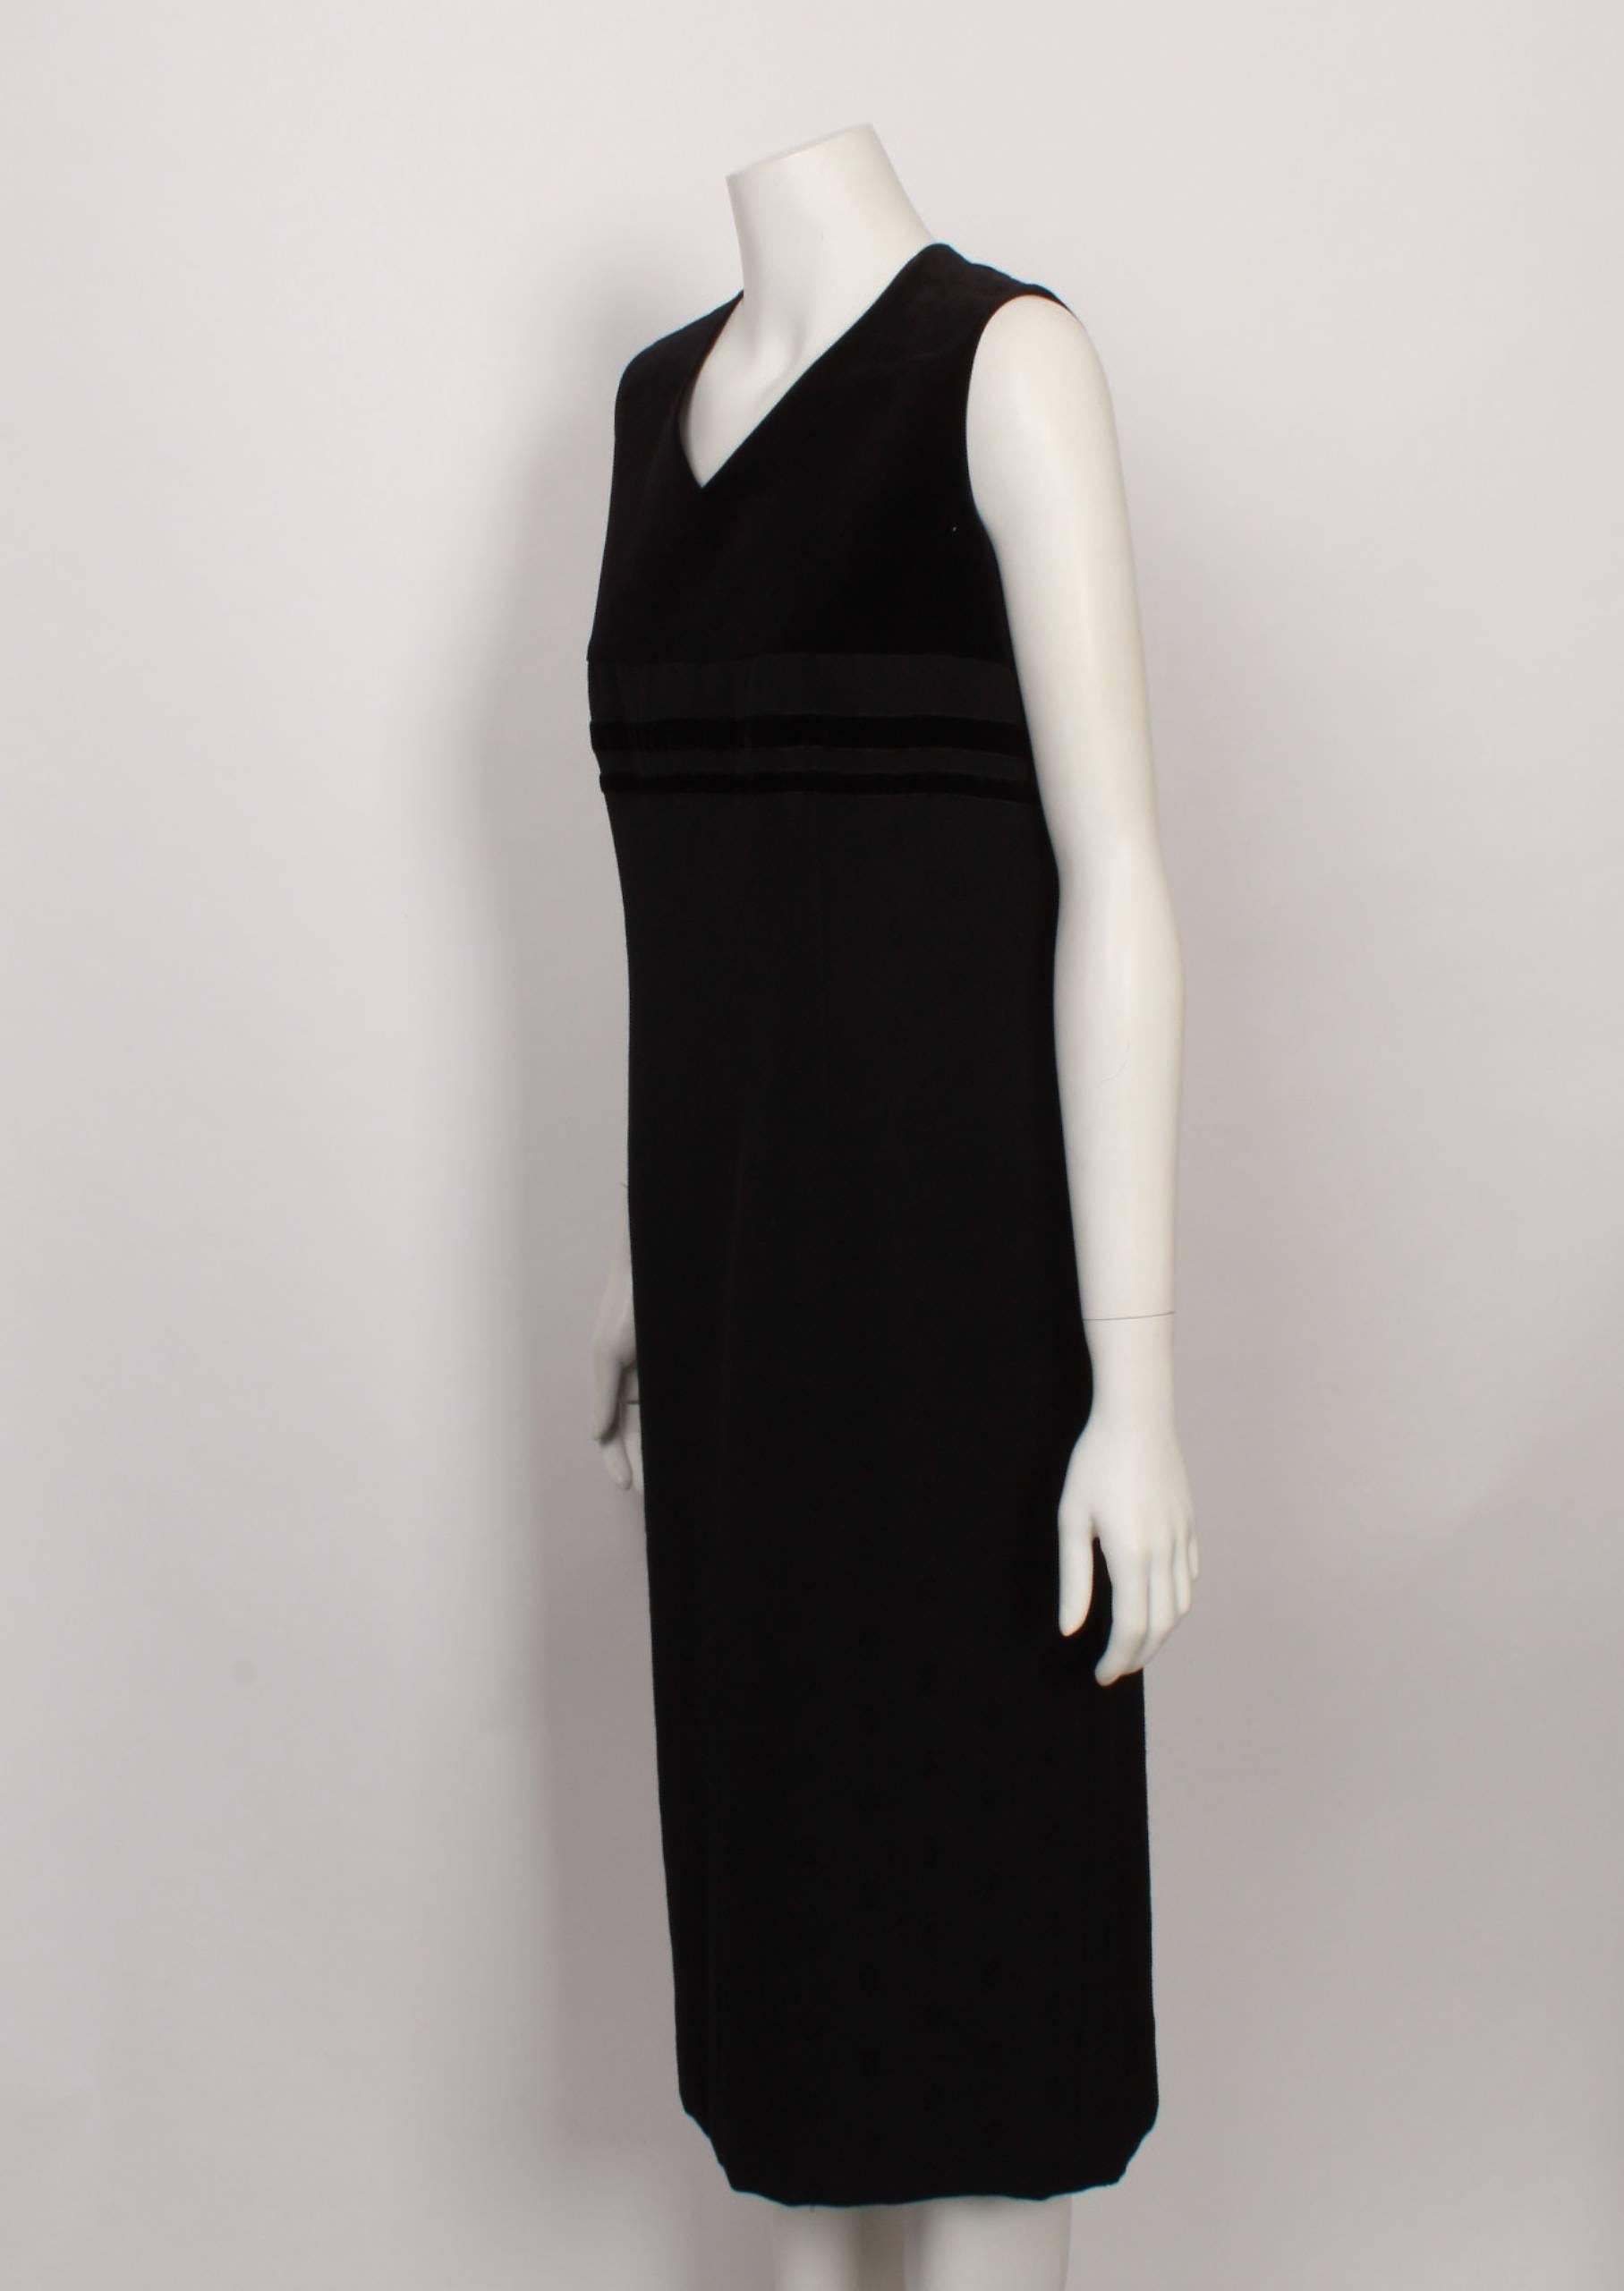 Robe de Chambre by  Comme des Garcons sleeveless shift dress features a cotton velvet empire-line bodice with velvet ribbon trims and classical V neckline. The main dress is made from wool twill with a small self all-over pattern. The back has a